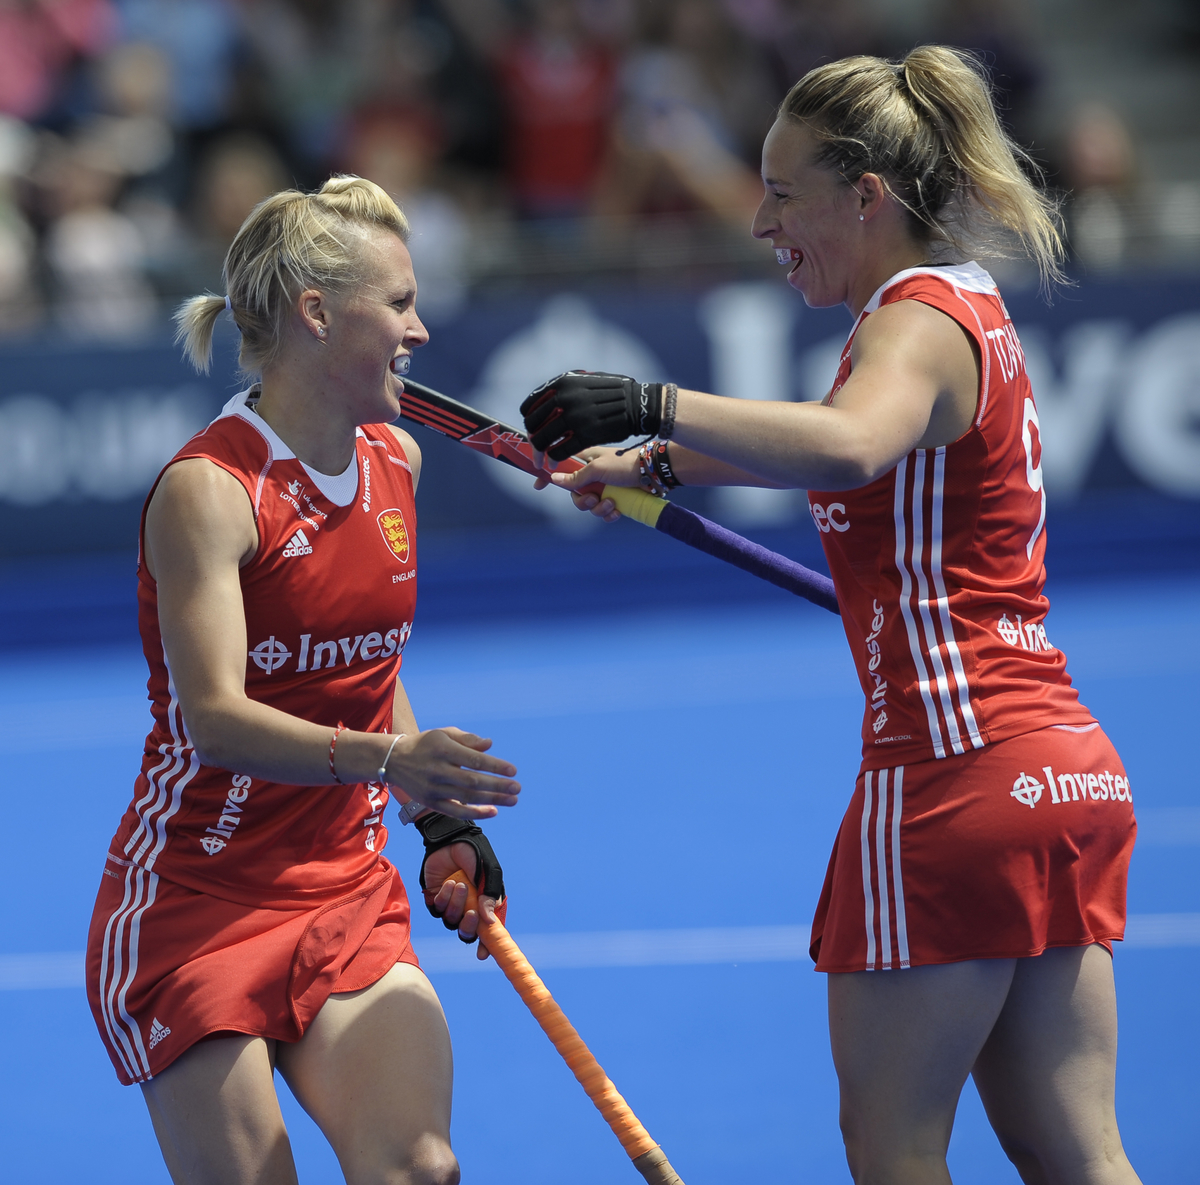 England goal scorers Susannah Townsend and Alex Danson celebrate scoring against Wales at the 2014 Investec London Cup - credit Ady Kerry.jpg